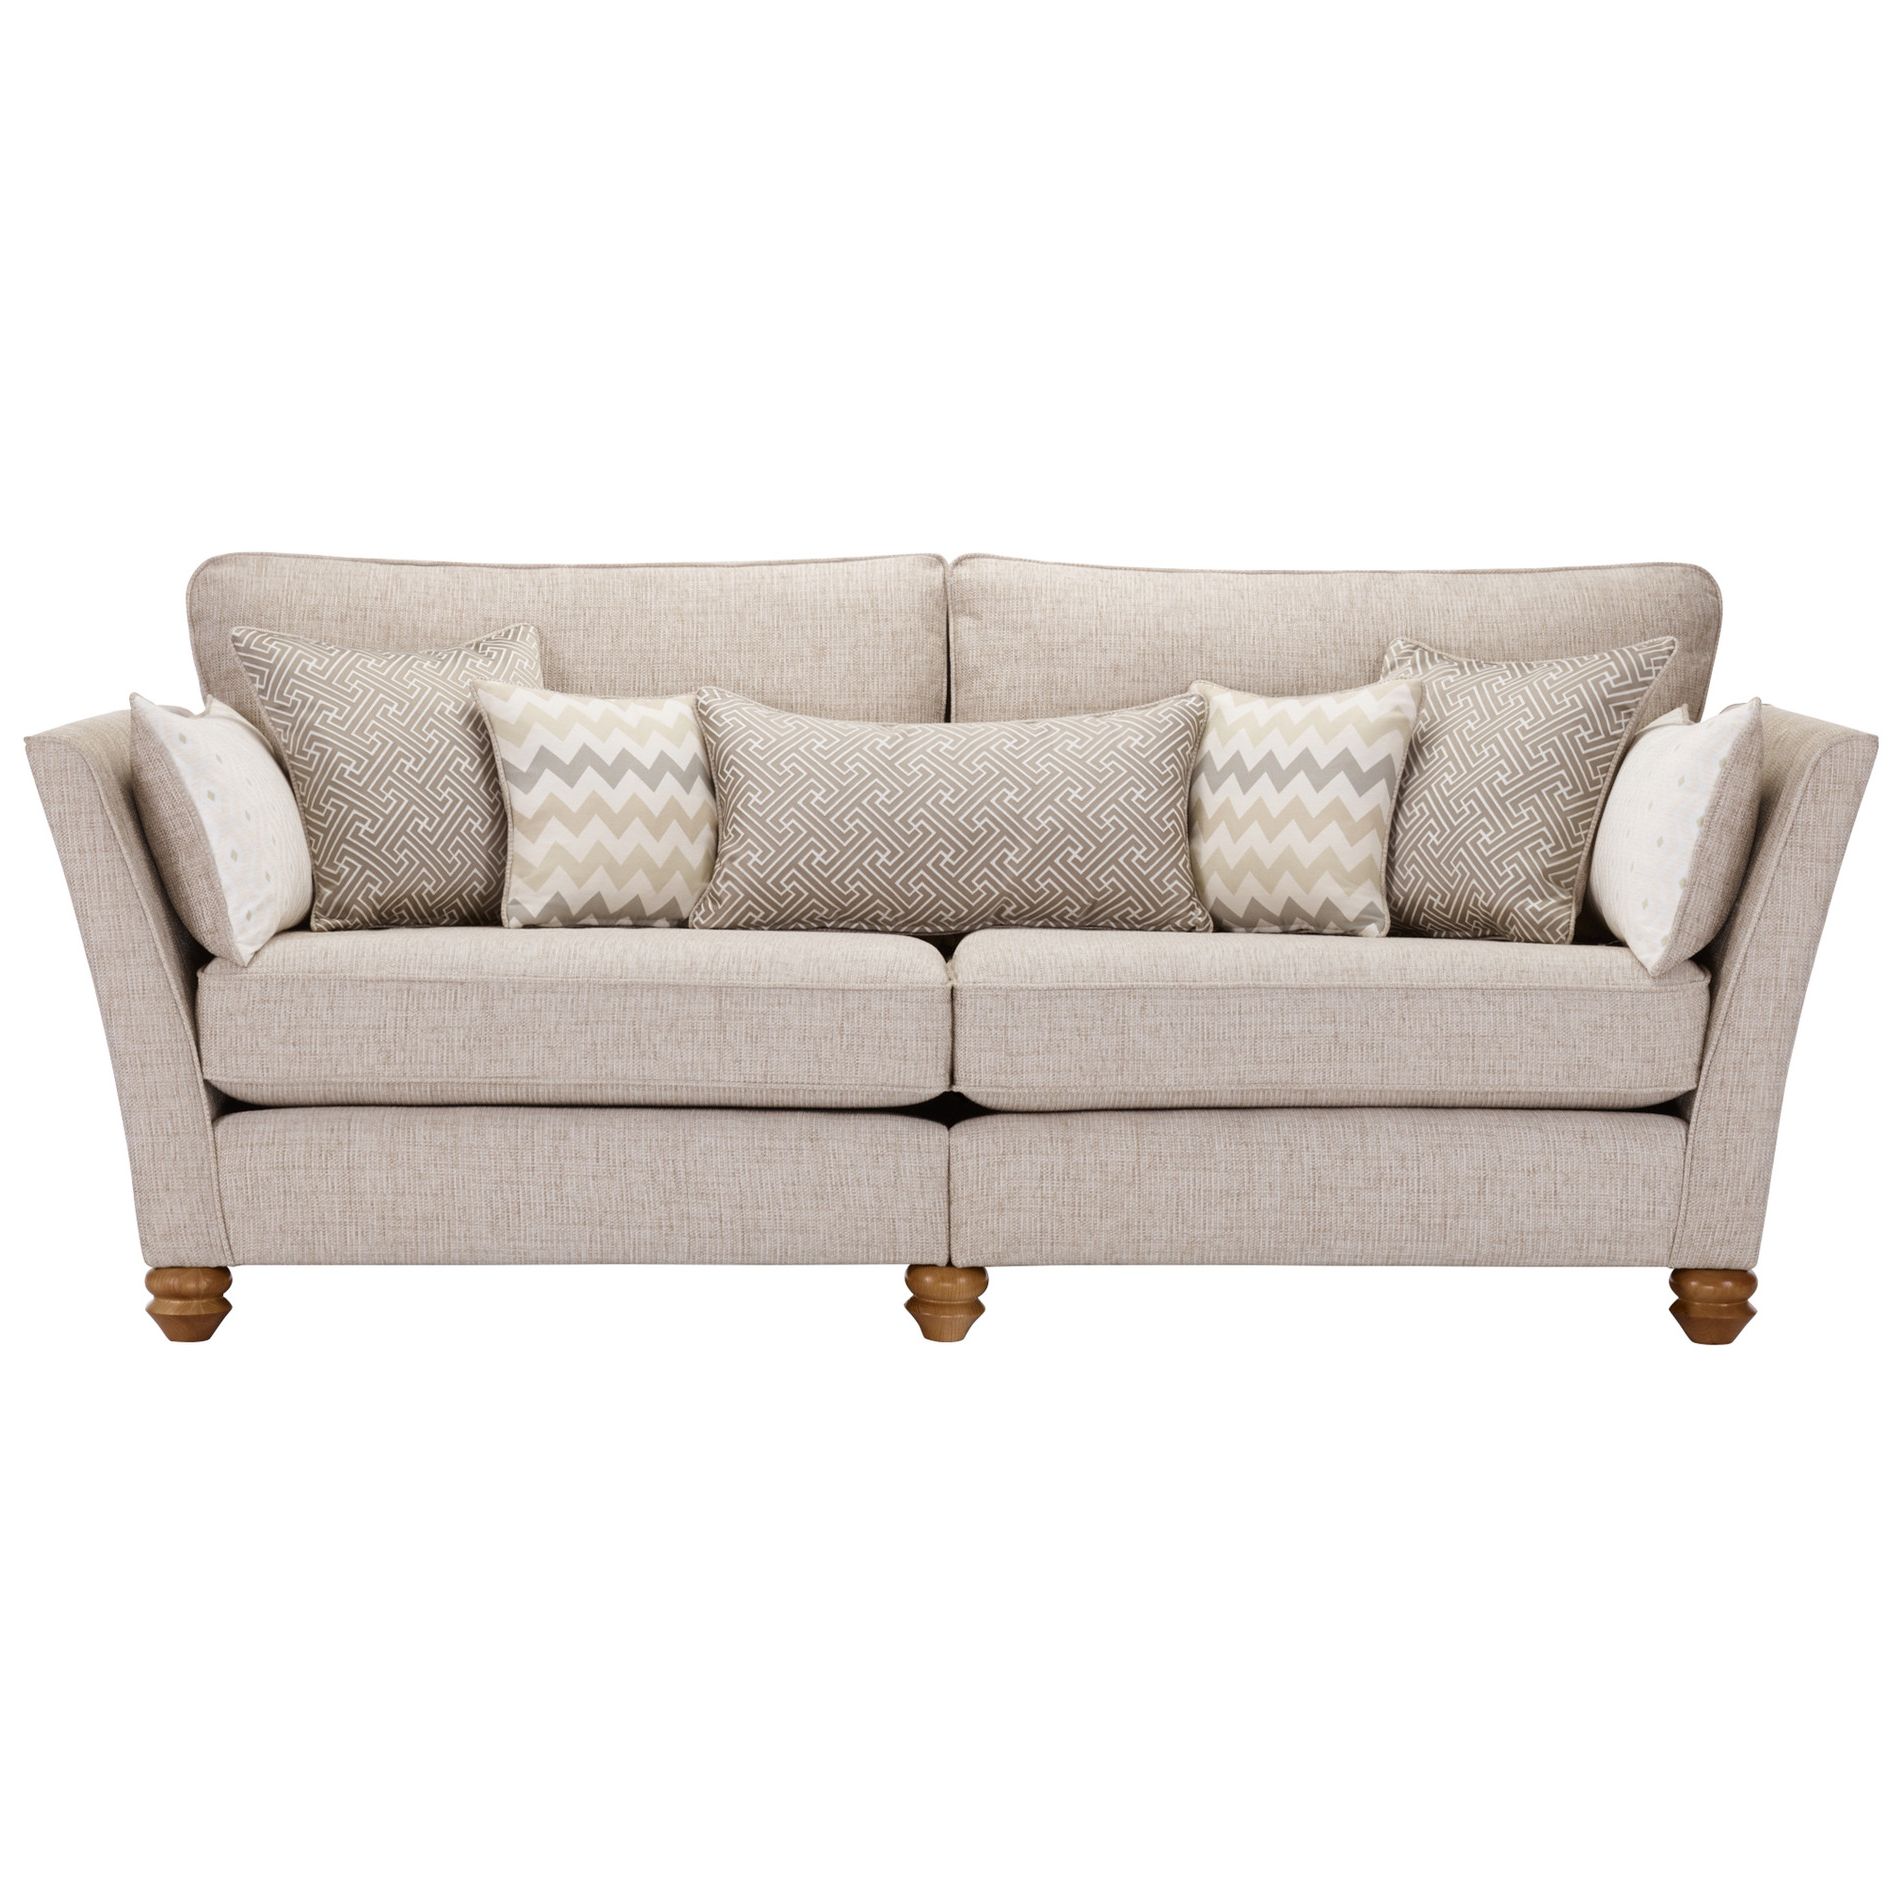 Widely Used Gainsborough 4 Seater Sofa In Beige + Matching Scatters Pertaining To Sofas In Beige (View 11 of 15)